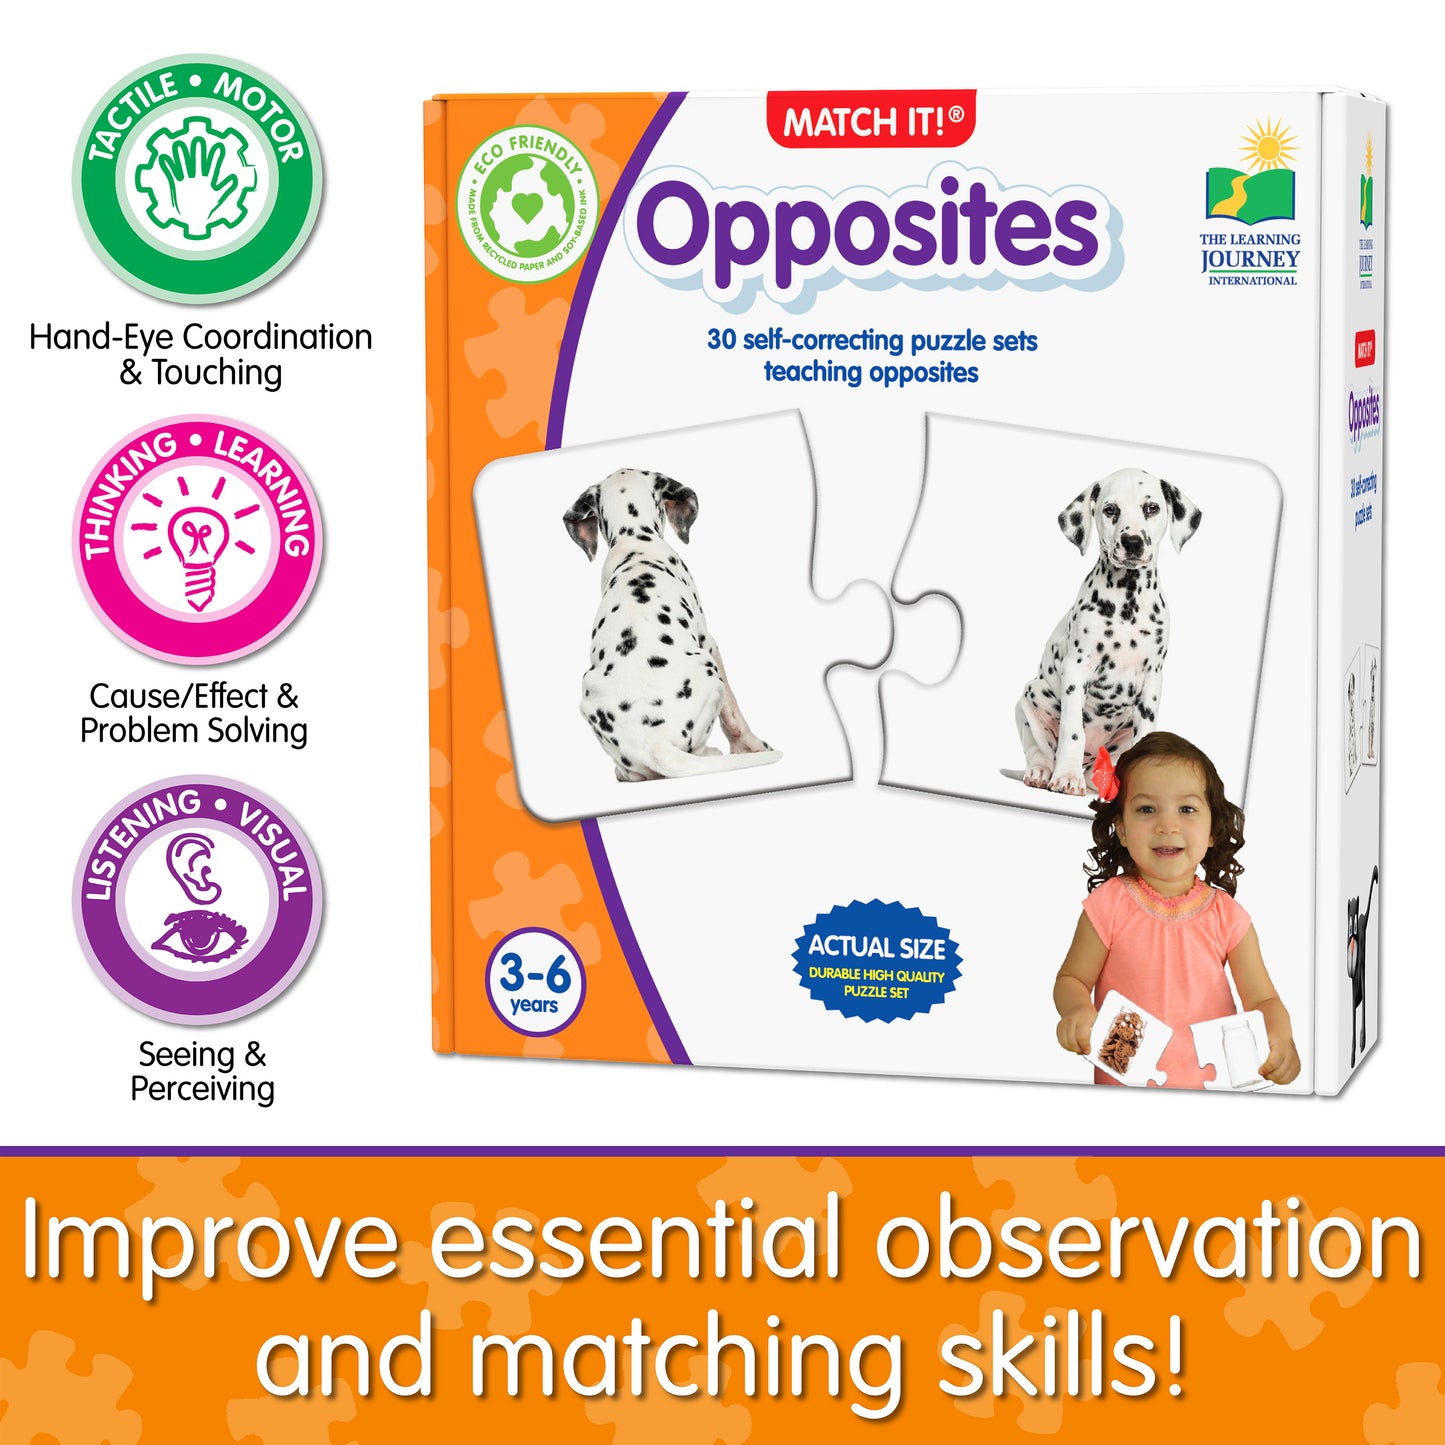 Infographic about Match It - Opposites' educational benefits that says, "Improve essential observation and matching skills!"